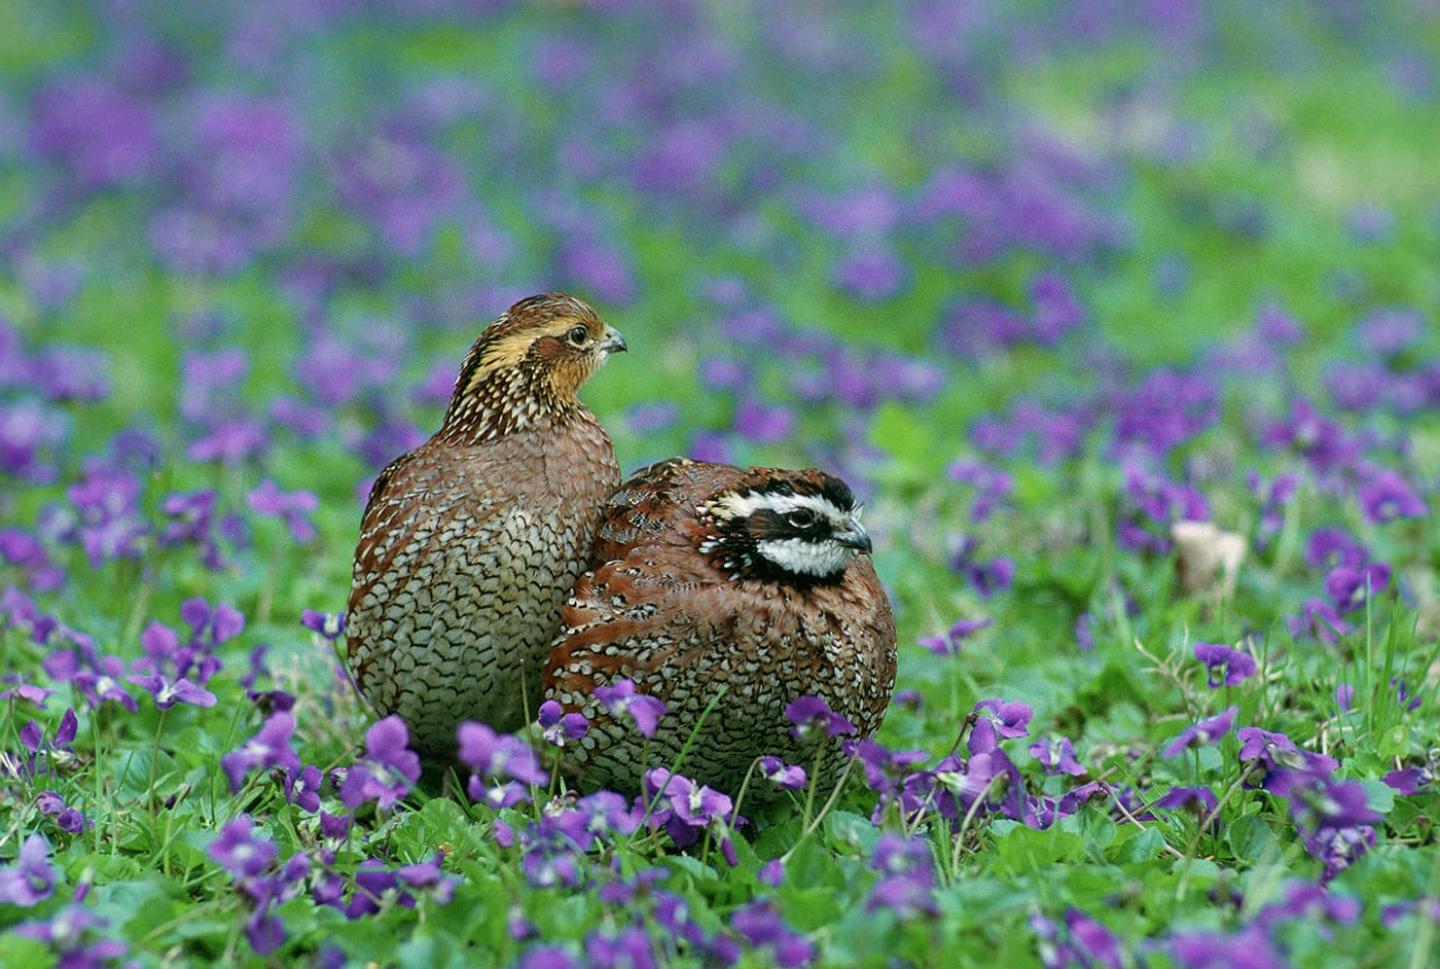 Two northern bobwhite quail in a field of violets.